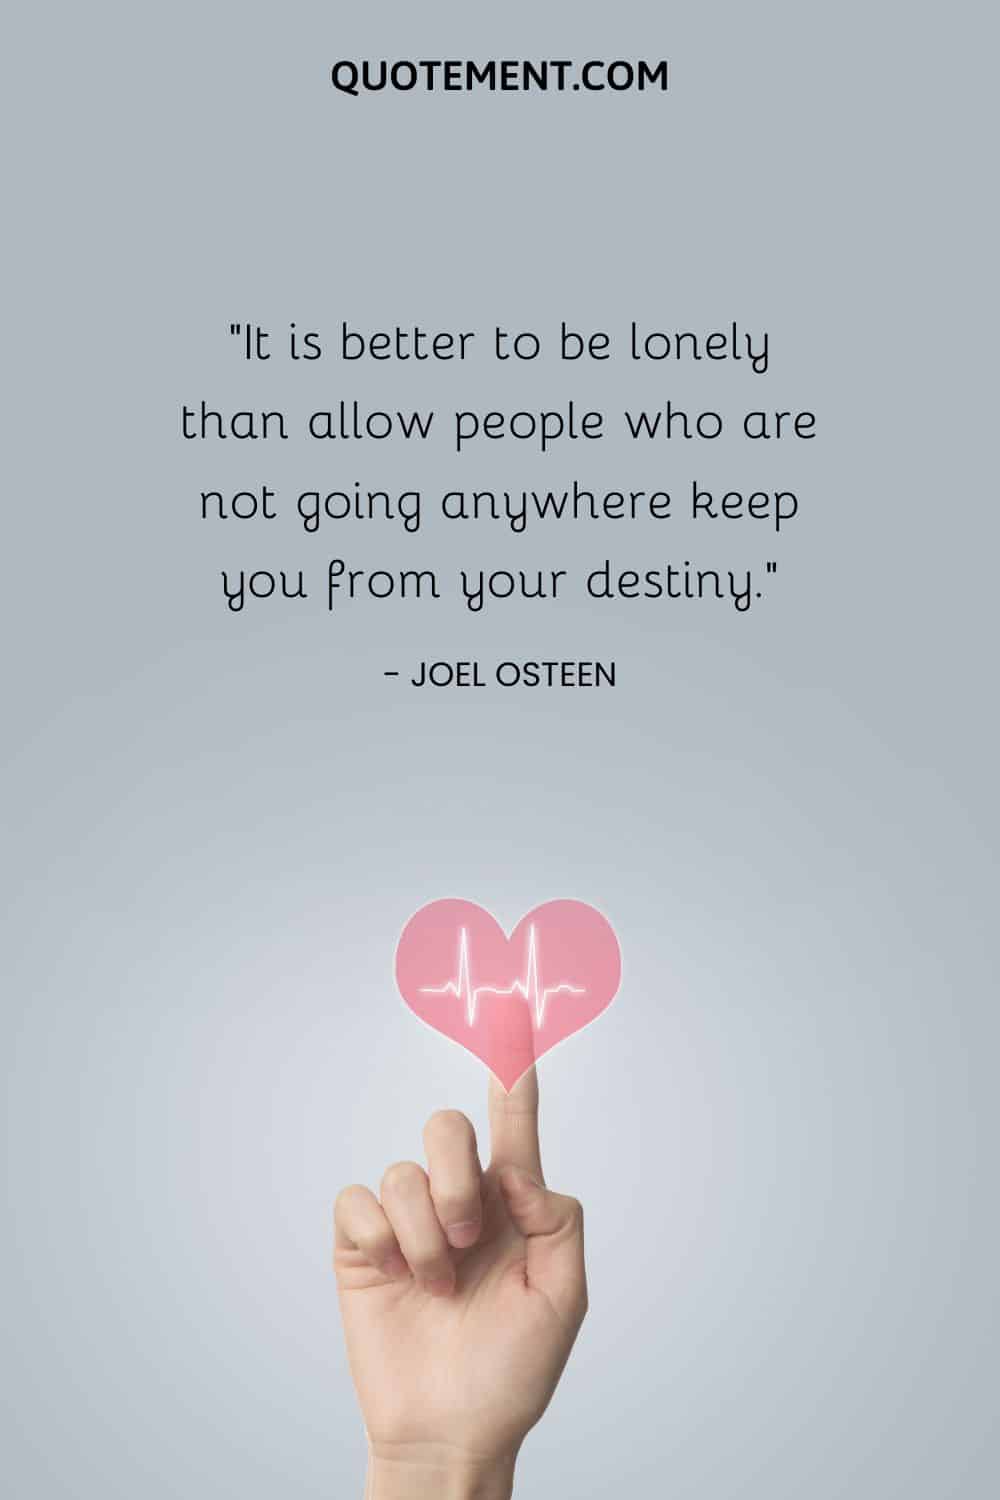 It is better to be lonely than allow people who are not going anywhere keep you from your destiny